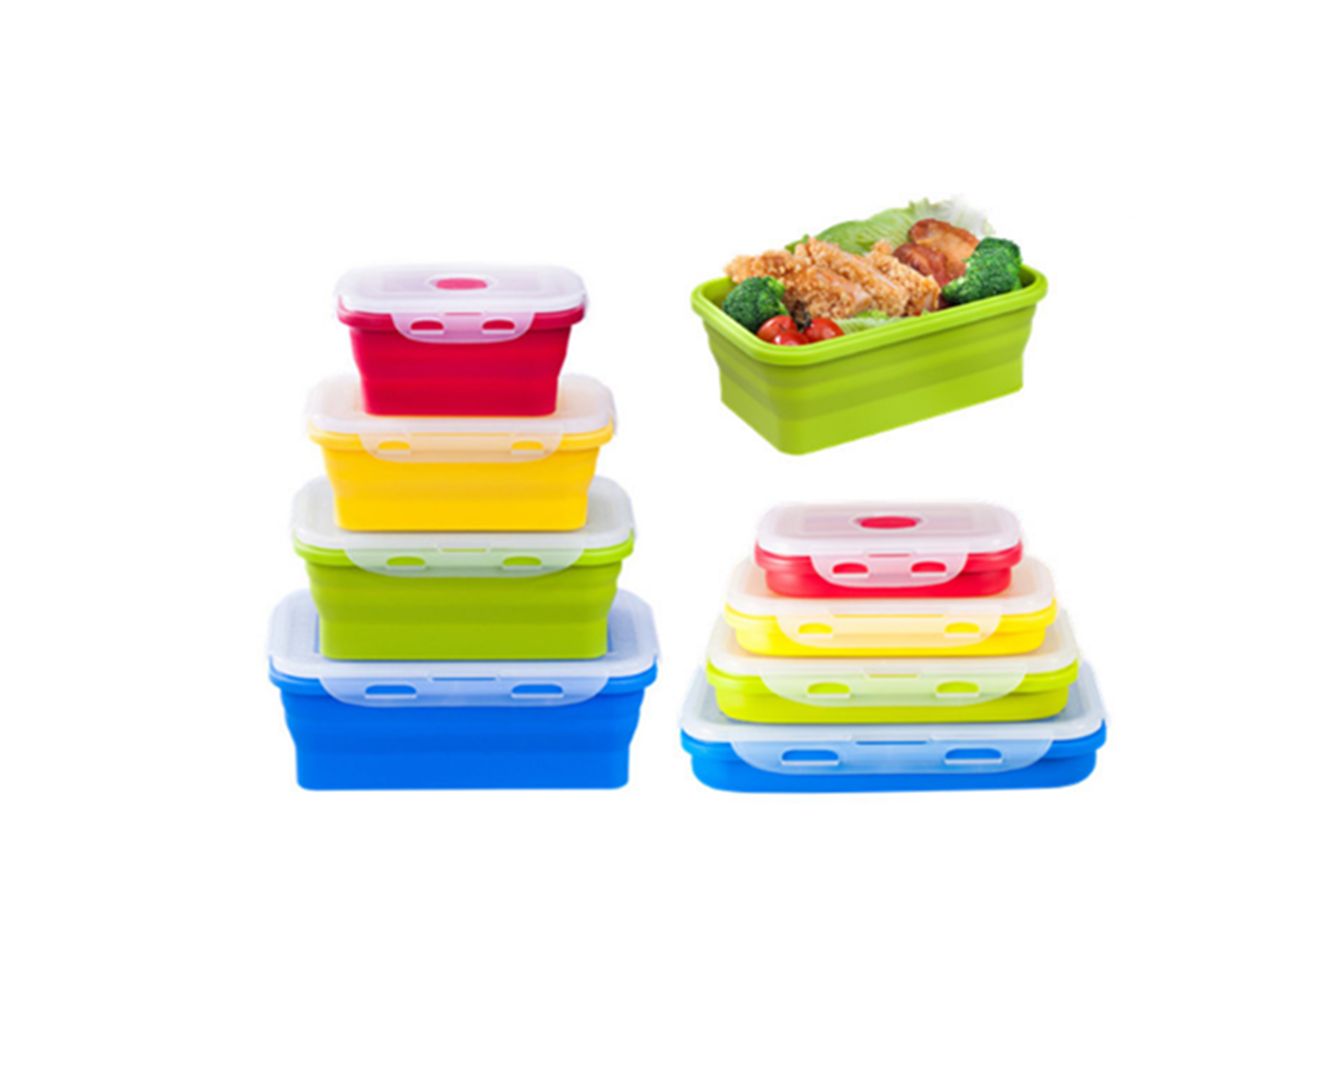 Silicone Collapsible Lunch Box with Lid-silicone Foladble Box Set of 4 Pcs